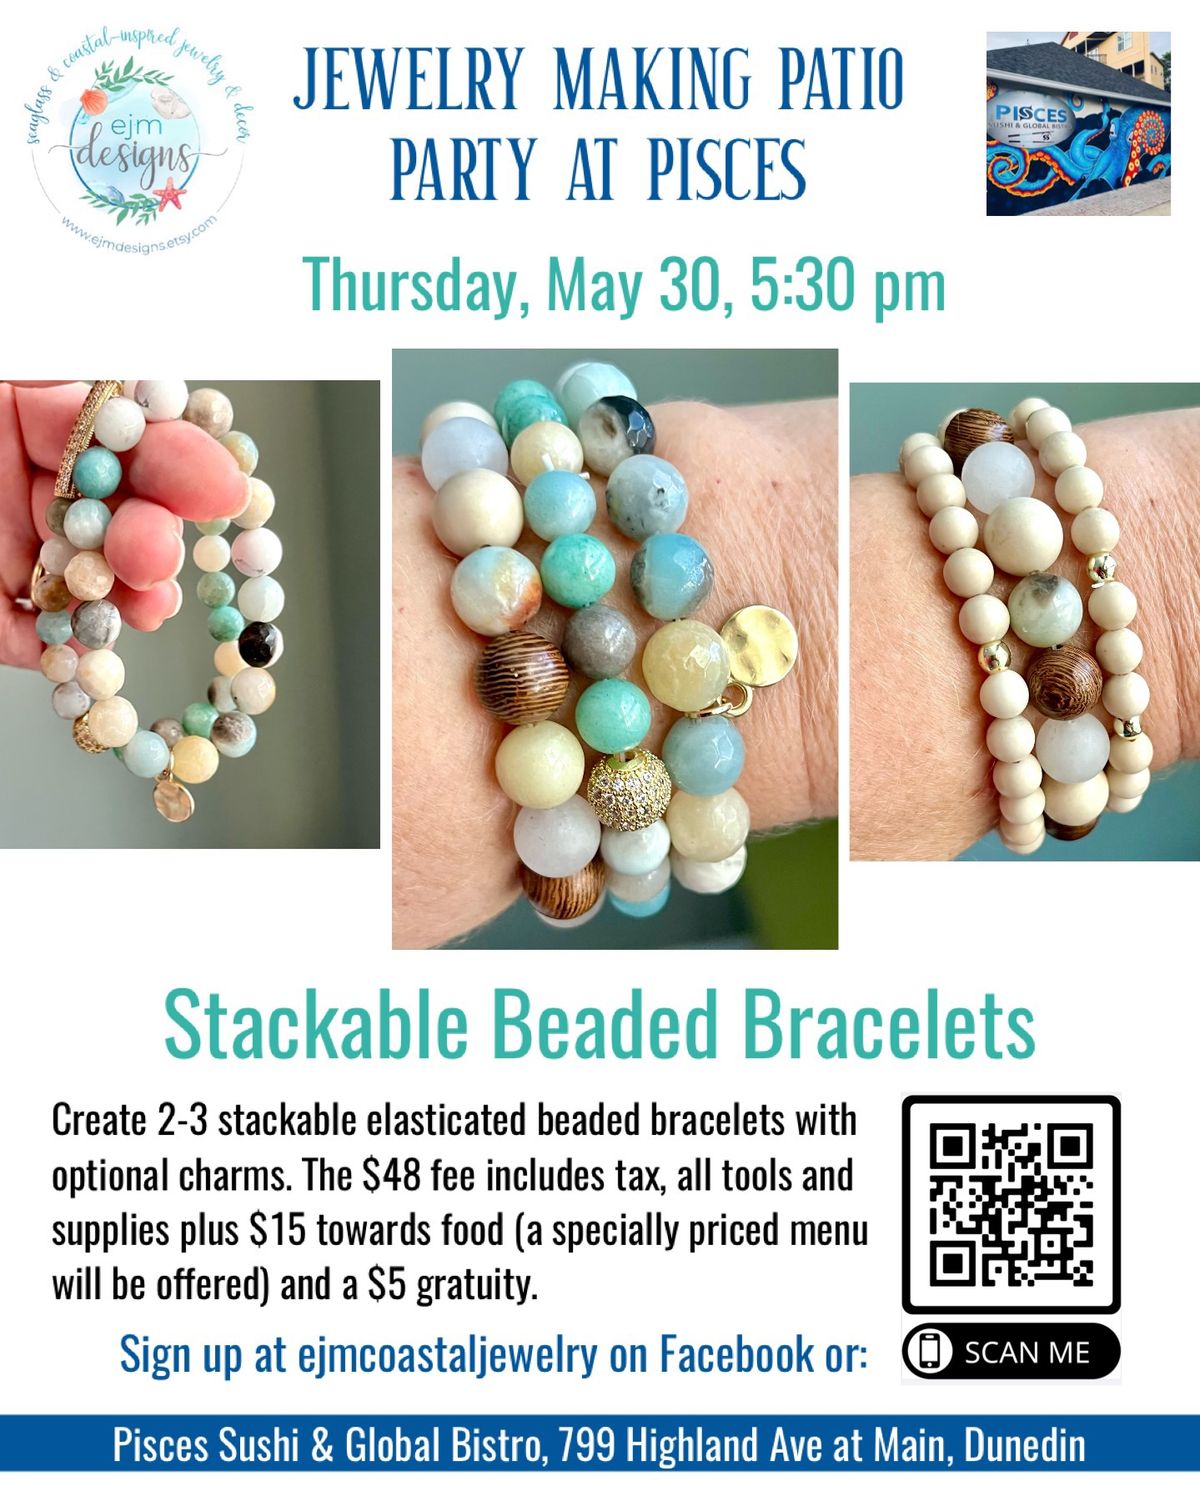 Jewelry Making Party at Pisces - Stackable Beaded Bracelets